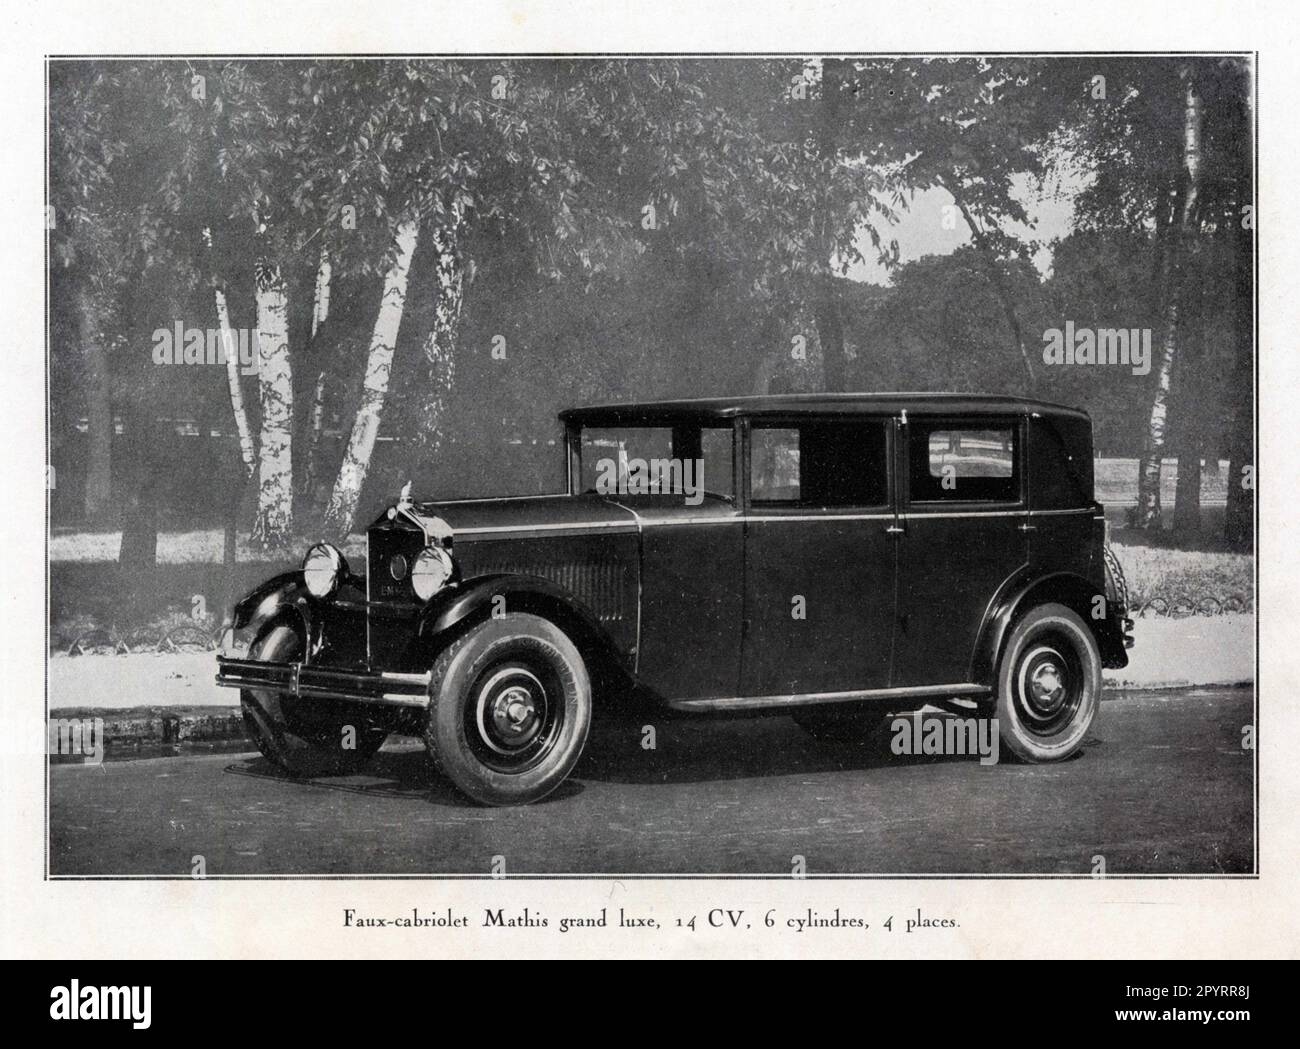 FAUX-CABRIOLET MATHIS GRAND LUXE, 14 CV, 6 CYLINDRES, 4 PLÄTZE. 1929 Stockfoto